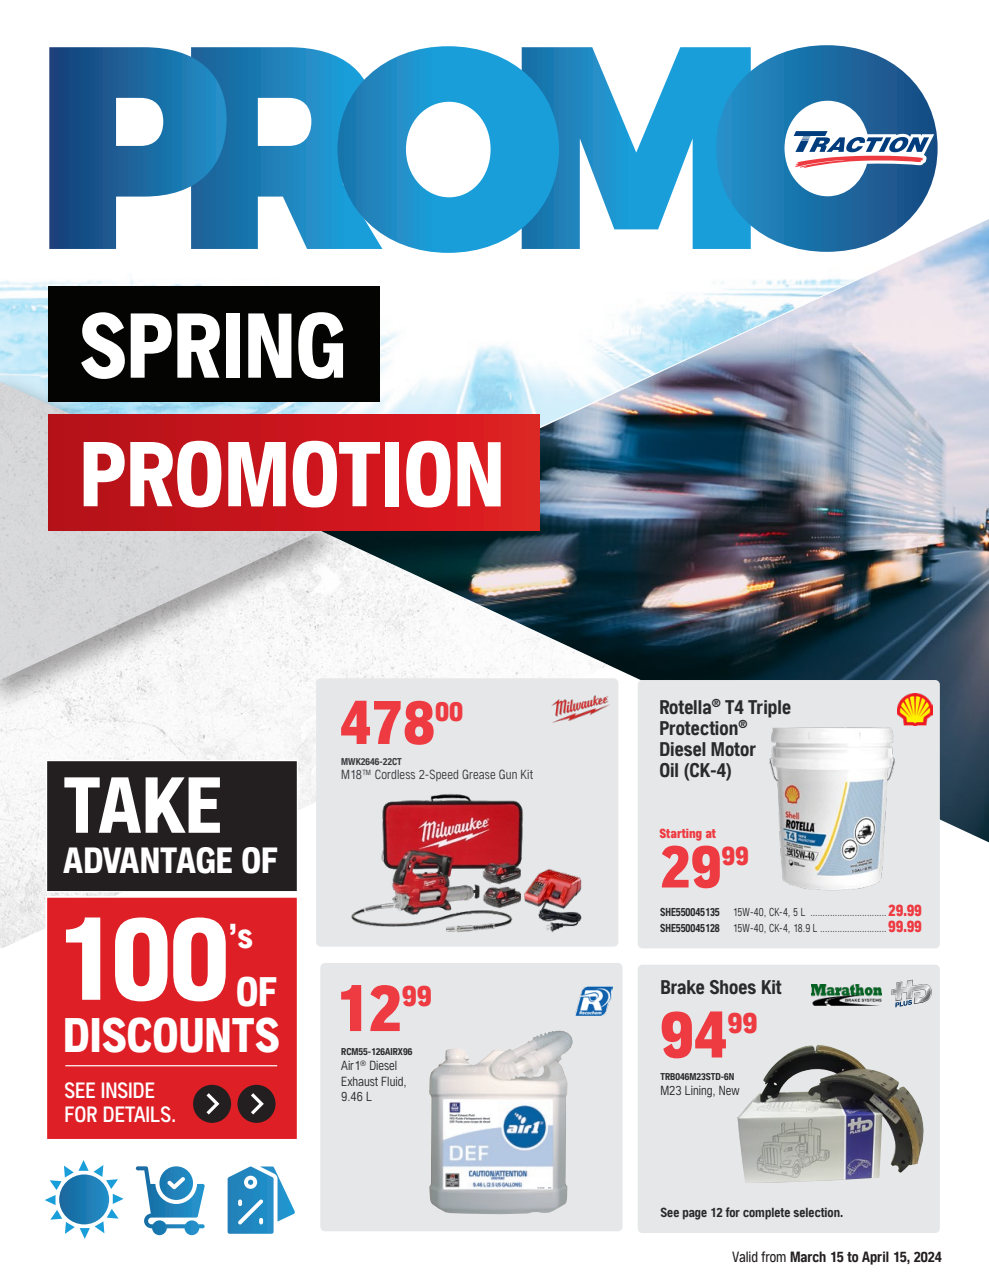 Traction Spring Promotion